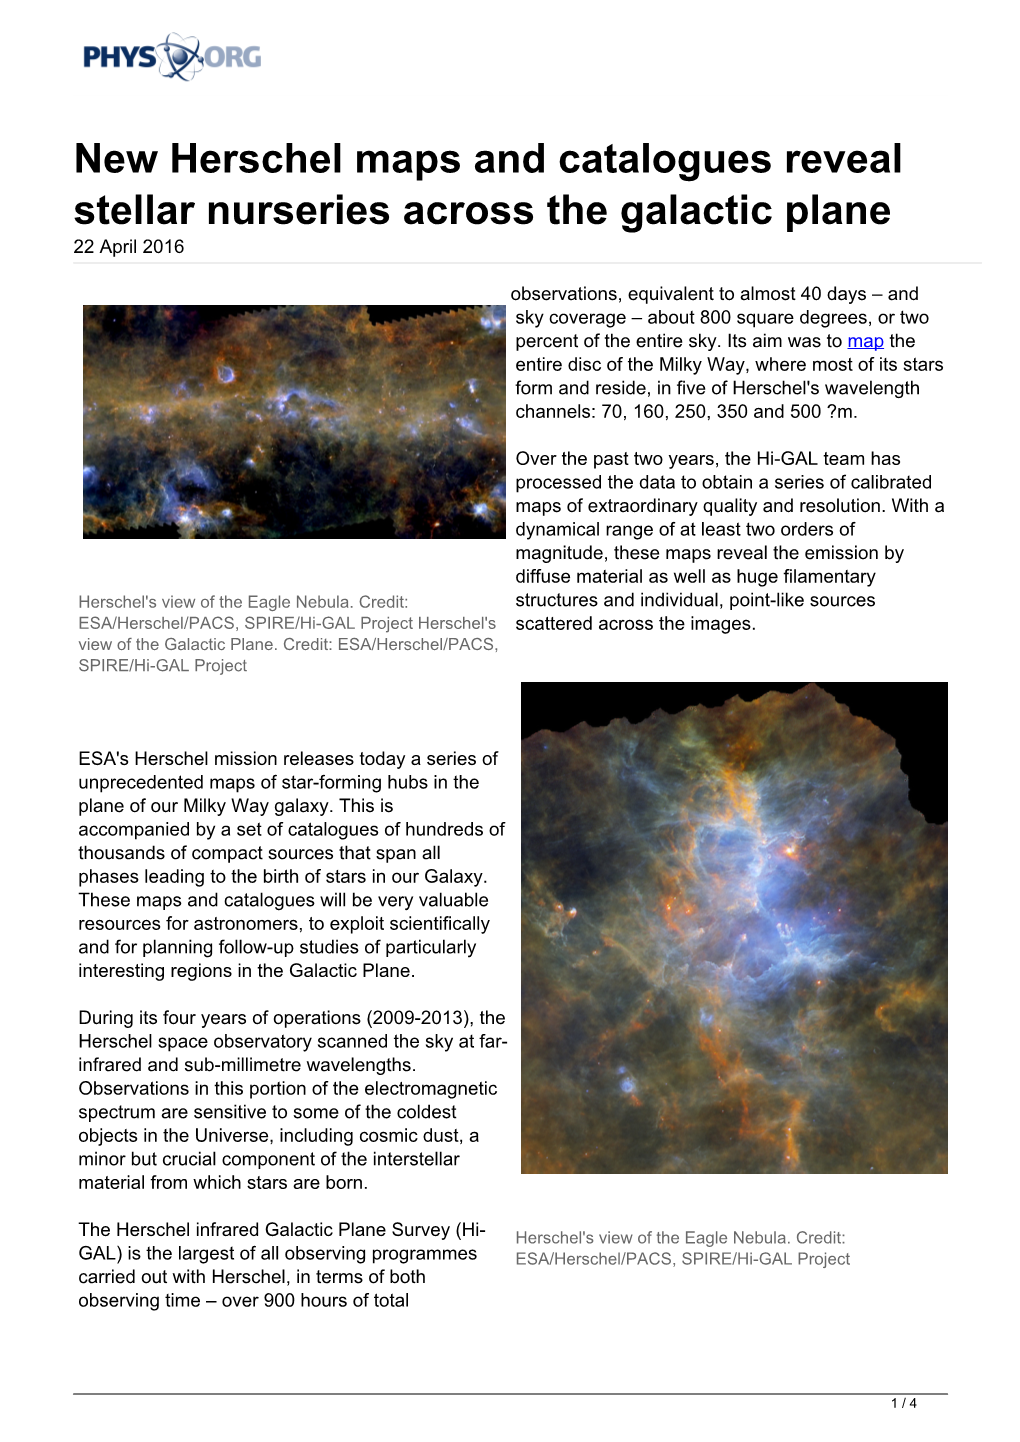 New Herschel Maps and Catalogues Reveal Stellar Nurseries Across the Galactic Plane 22 April 2016